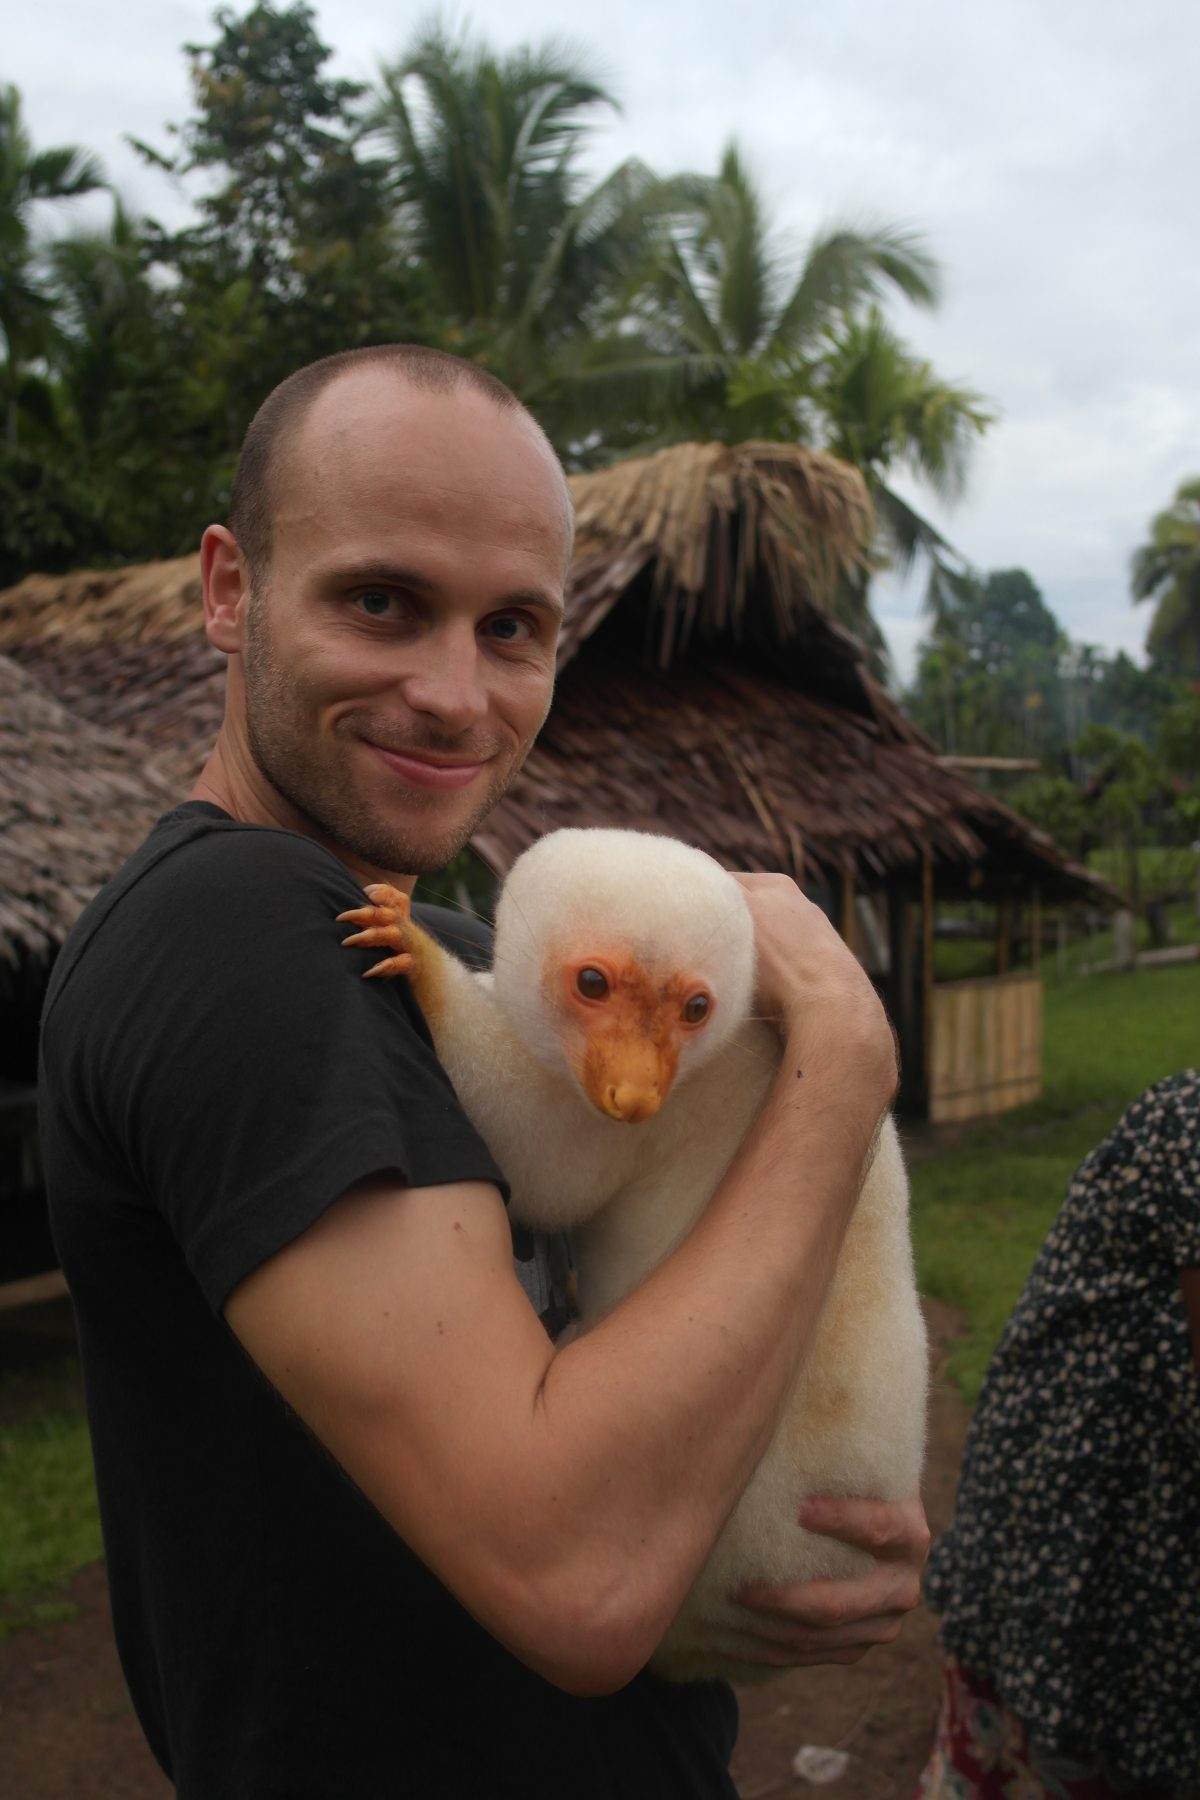 The Cuscus, Papua New Guinea rare animal with white fur is held by a male tourist